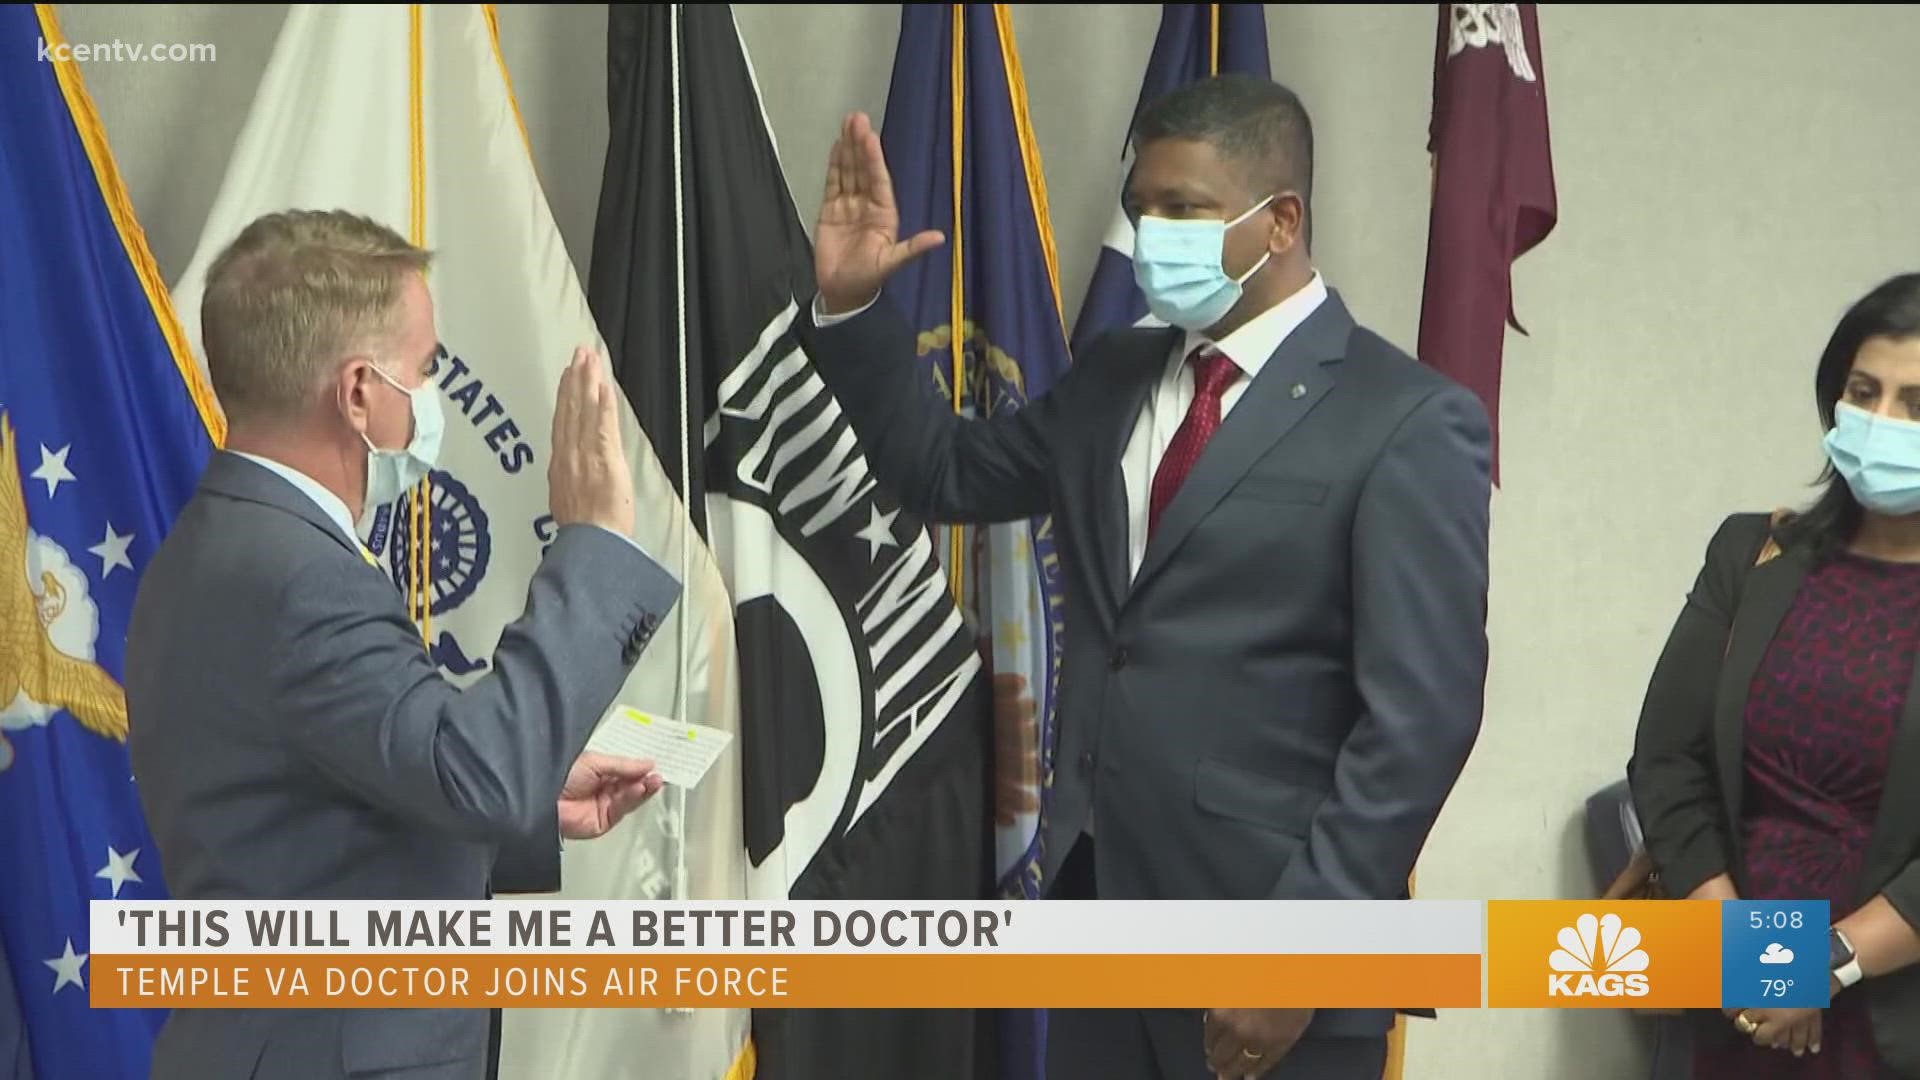 In order to be a better doctor for his patients at the Veterans Affairs Hospital in Temple, one local physician swears in to serve in the United States Air Force